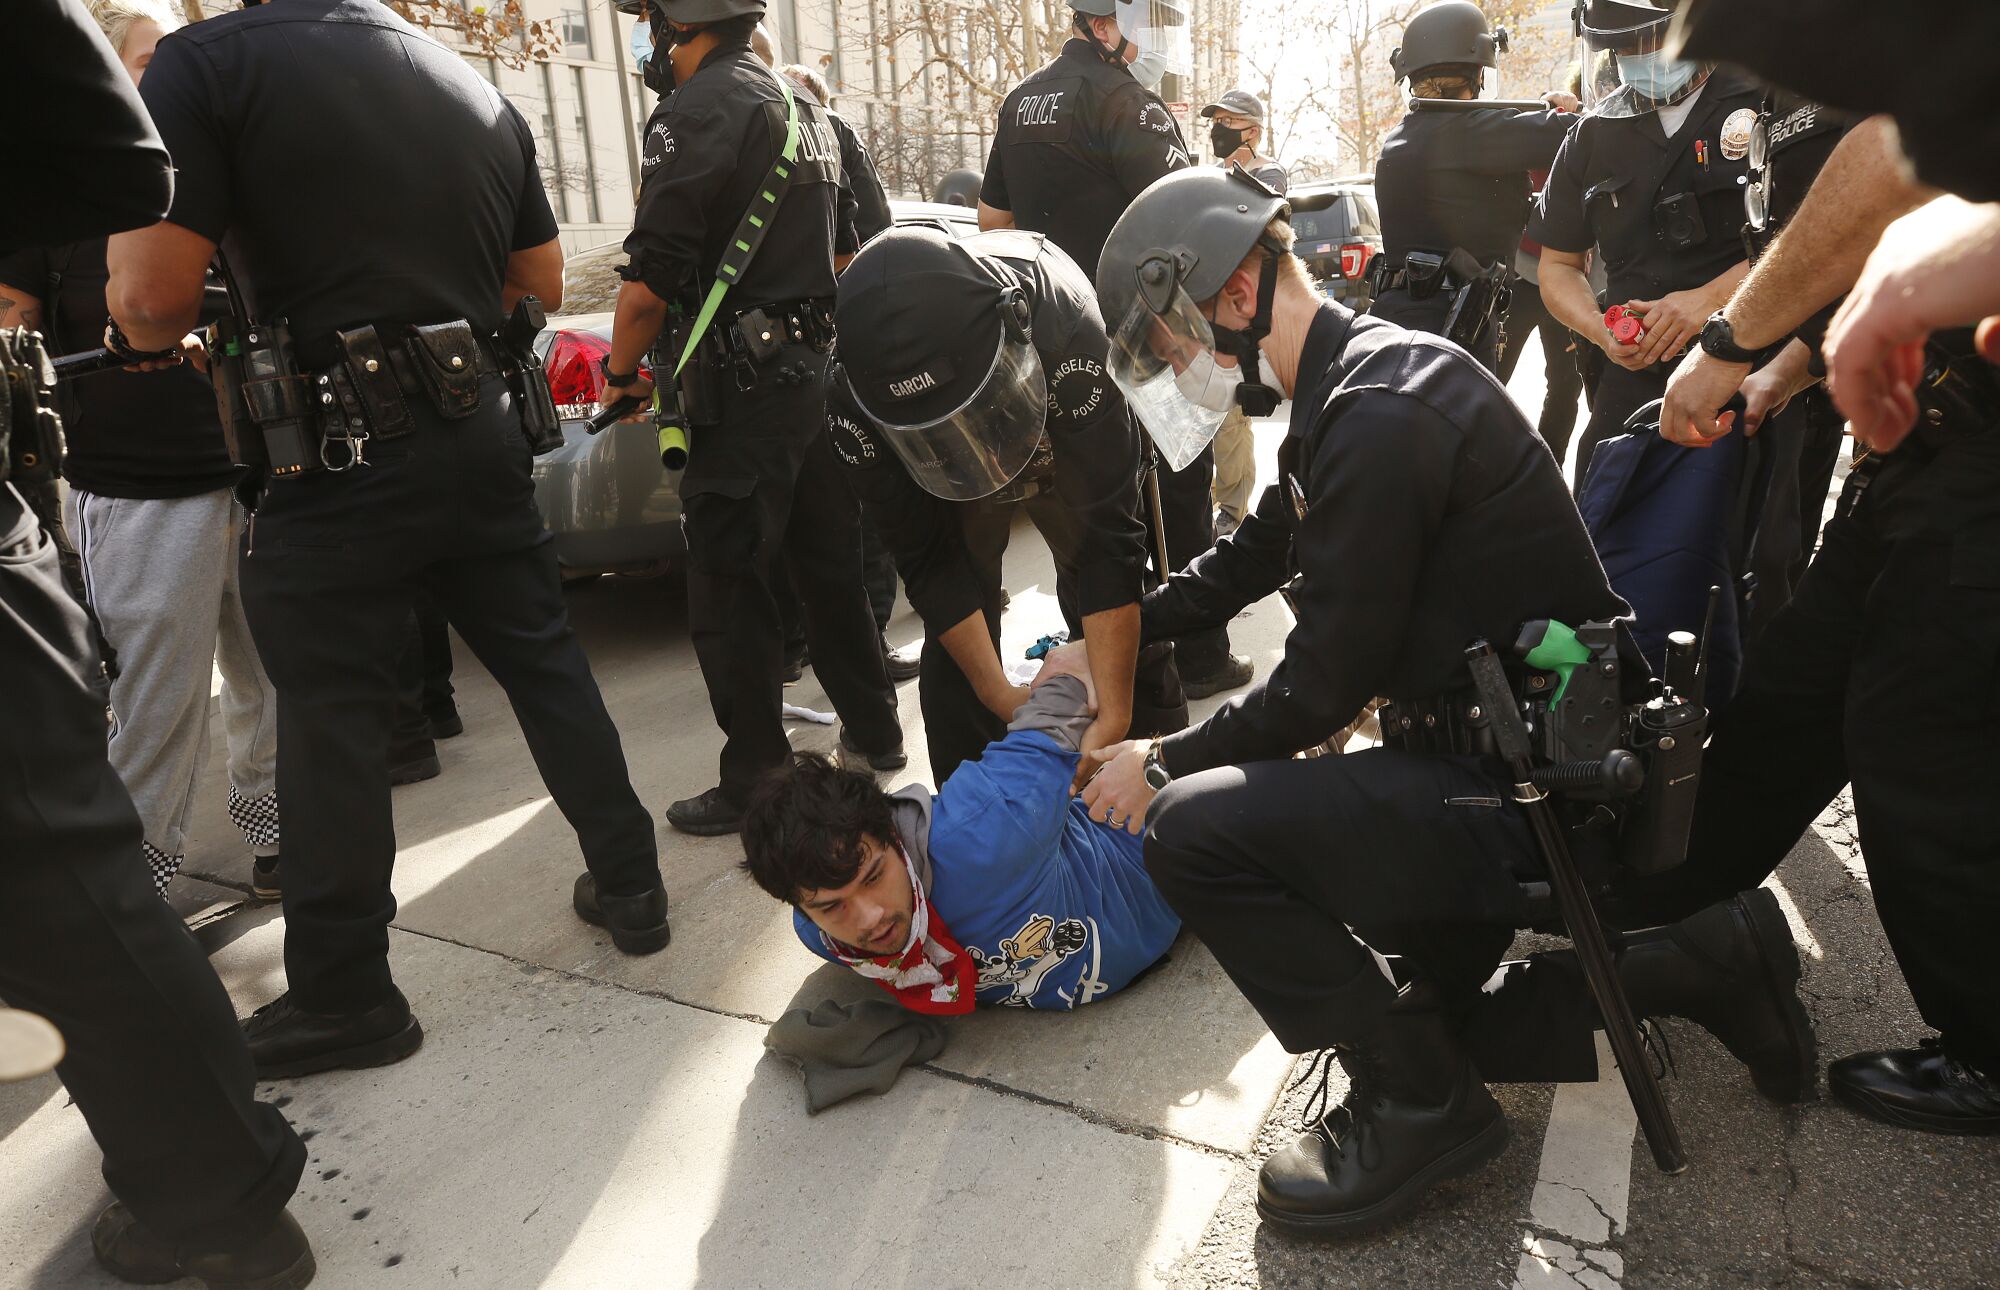 Counterprotesters are arrested after fighting with Trump supporters outside L.A. City Hall.